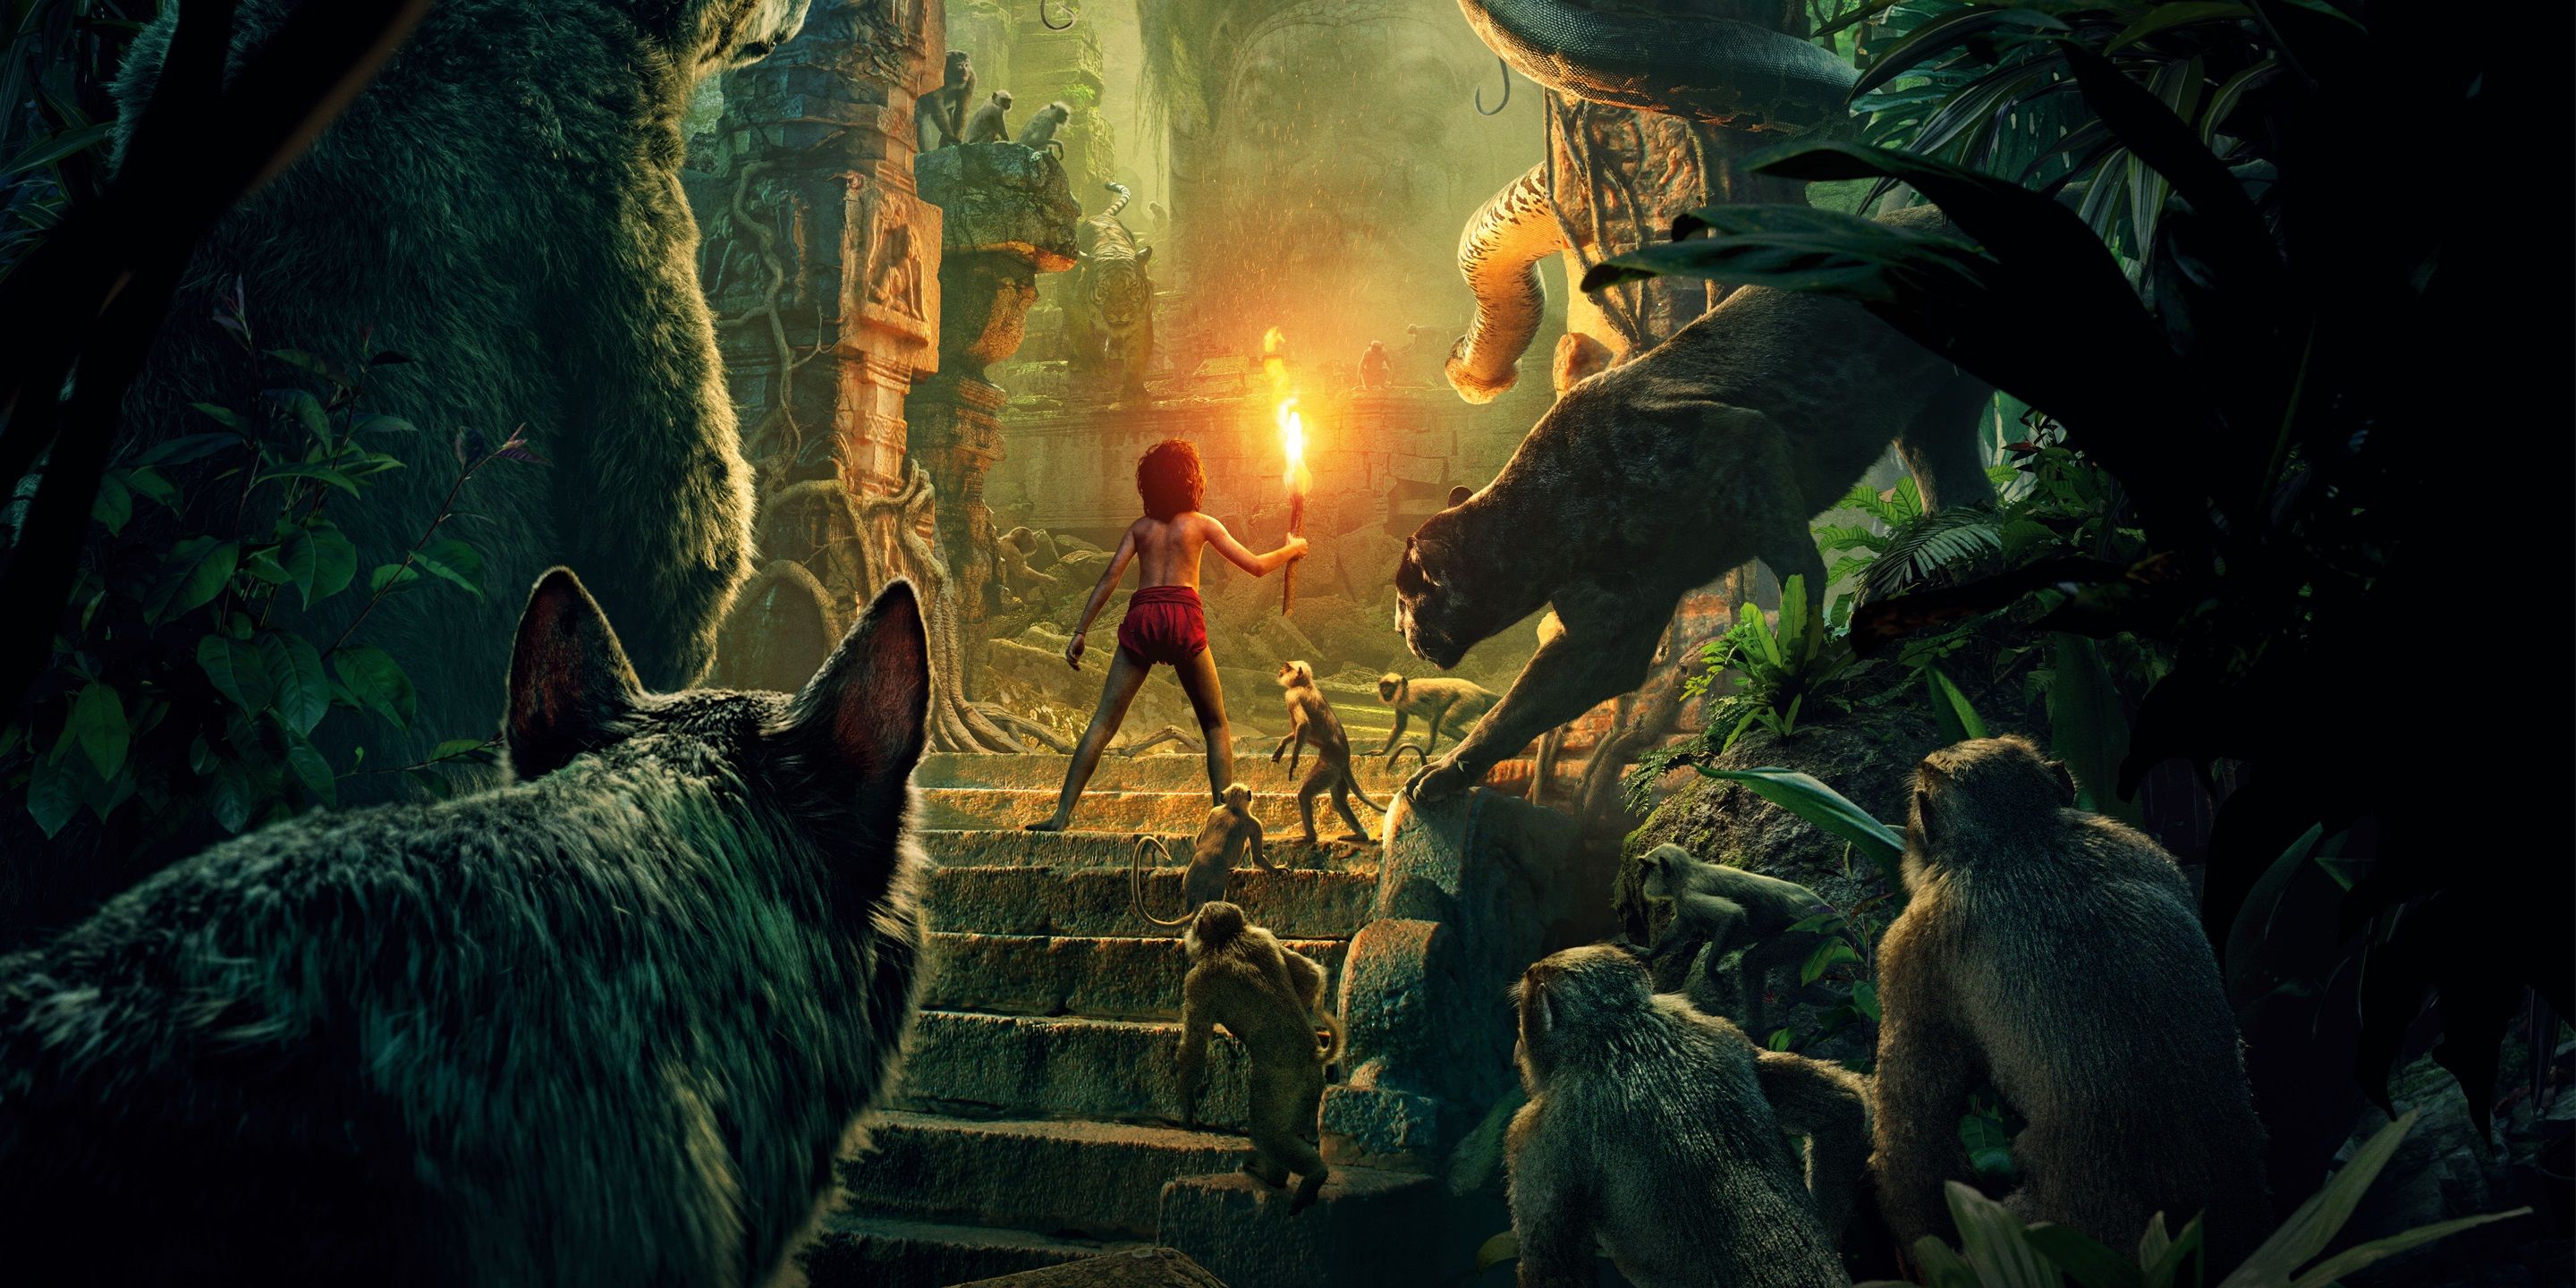 10 Reasons The Jungle Book Is Disney's Best Live-Action Remake